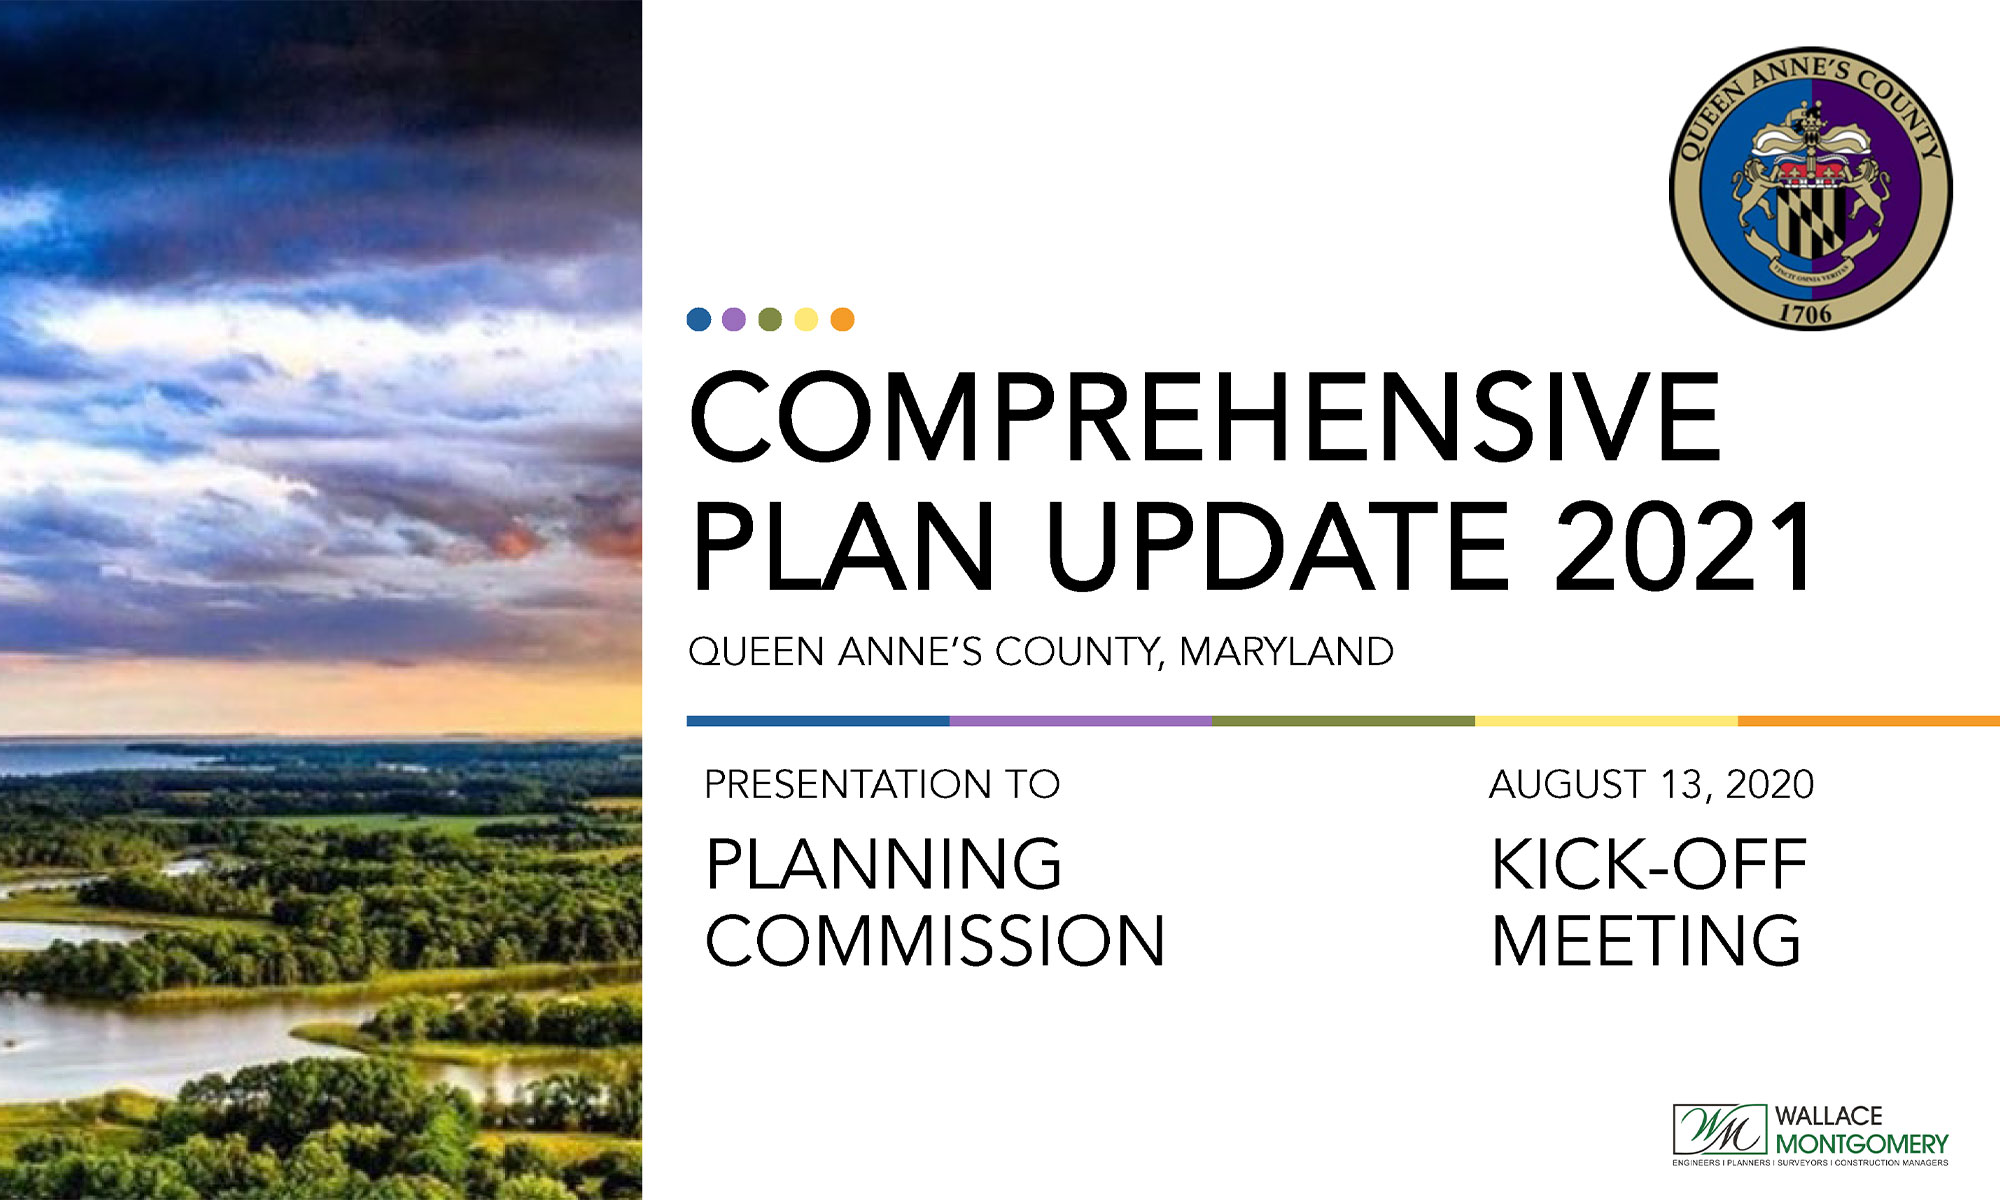 Wallace Montgomery: Comprehensive Plan Update - Queen Anne's County